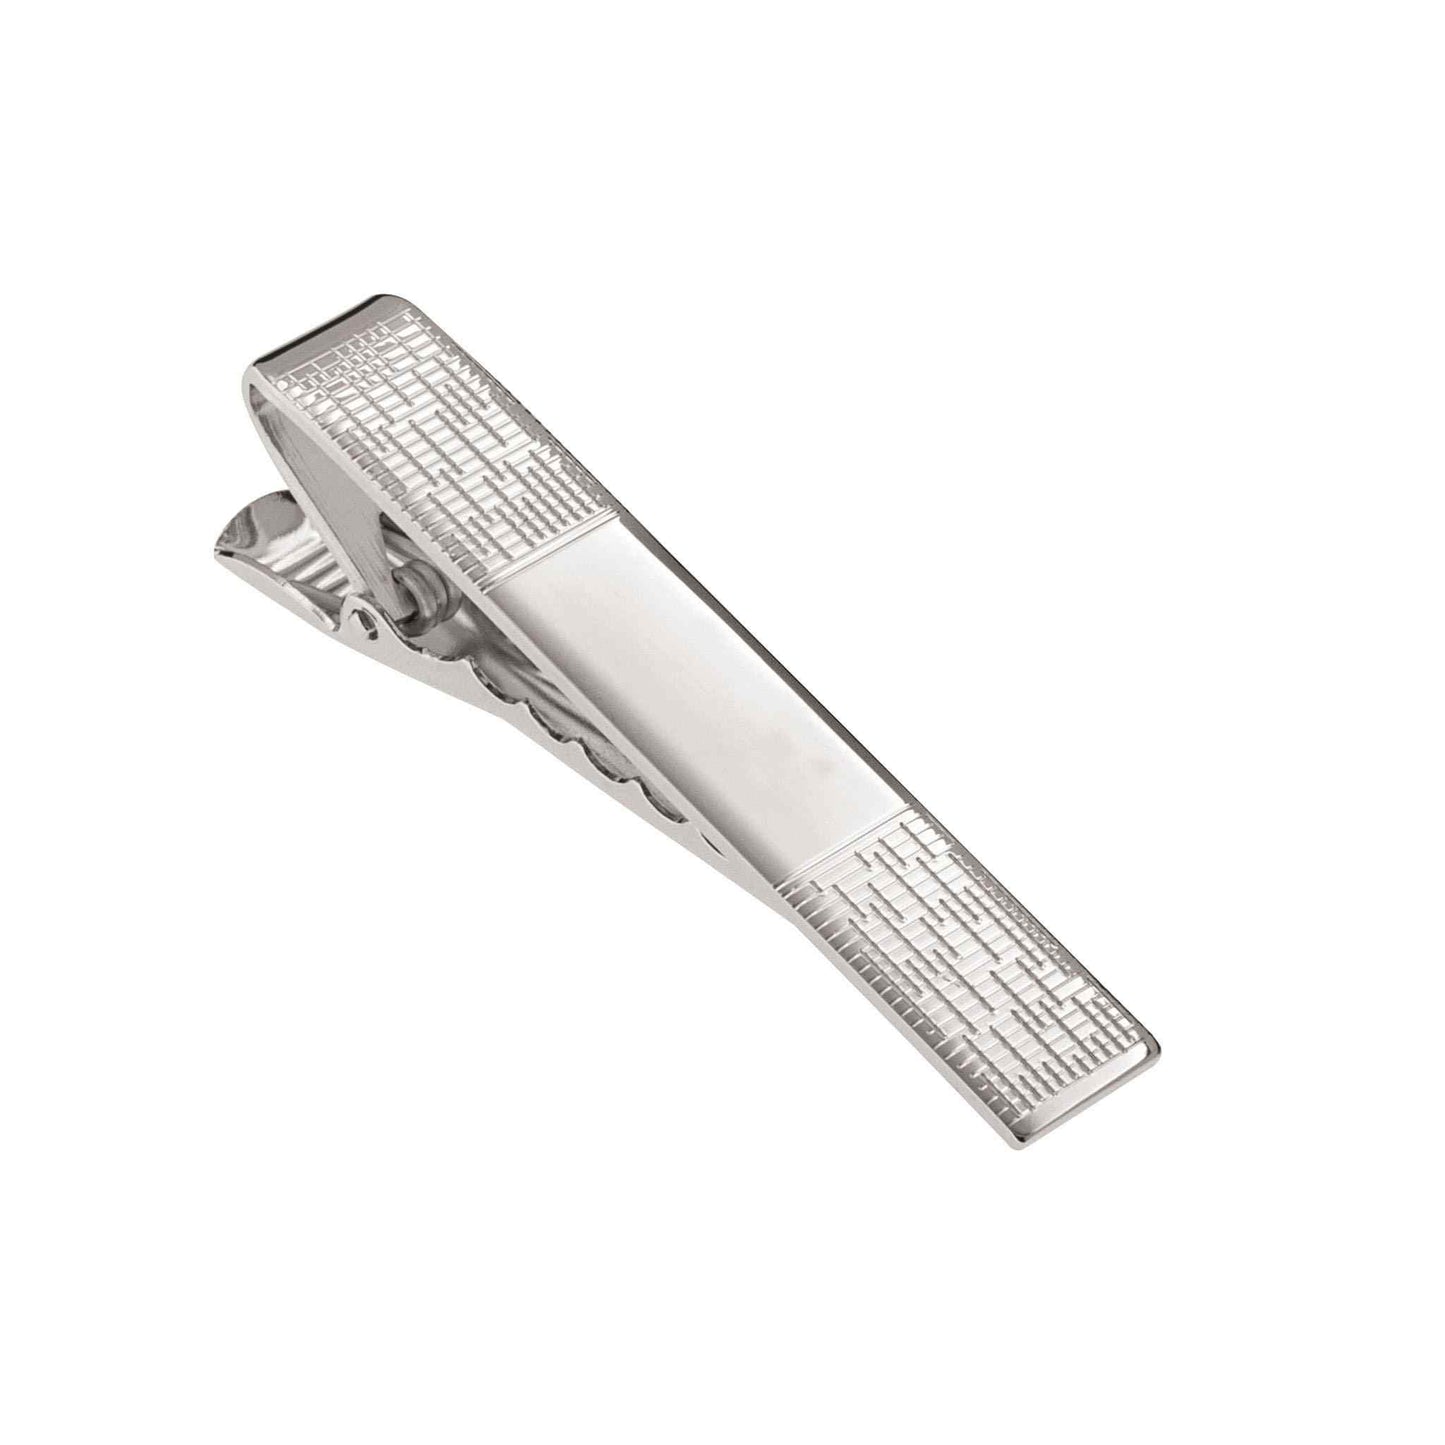 A tie bar with digital pattern displayed on a neutral white background.